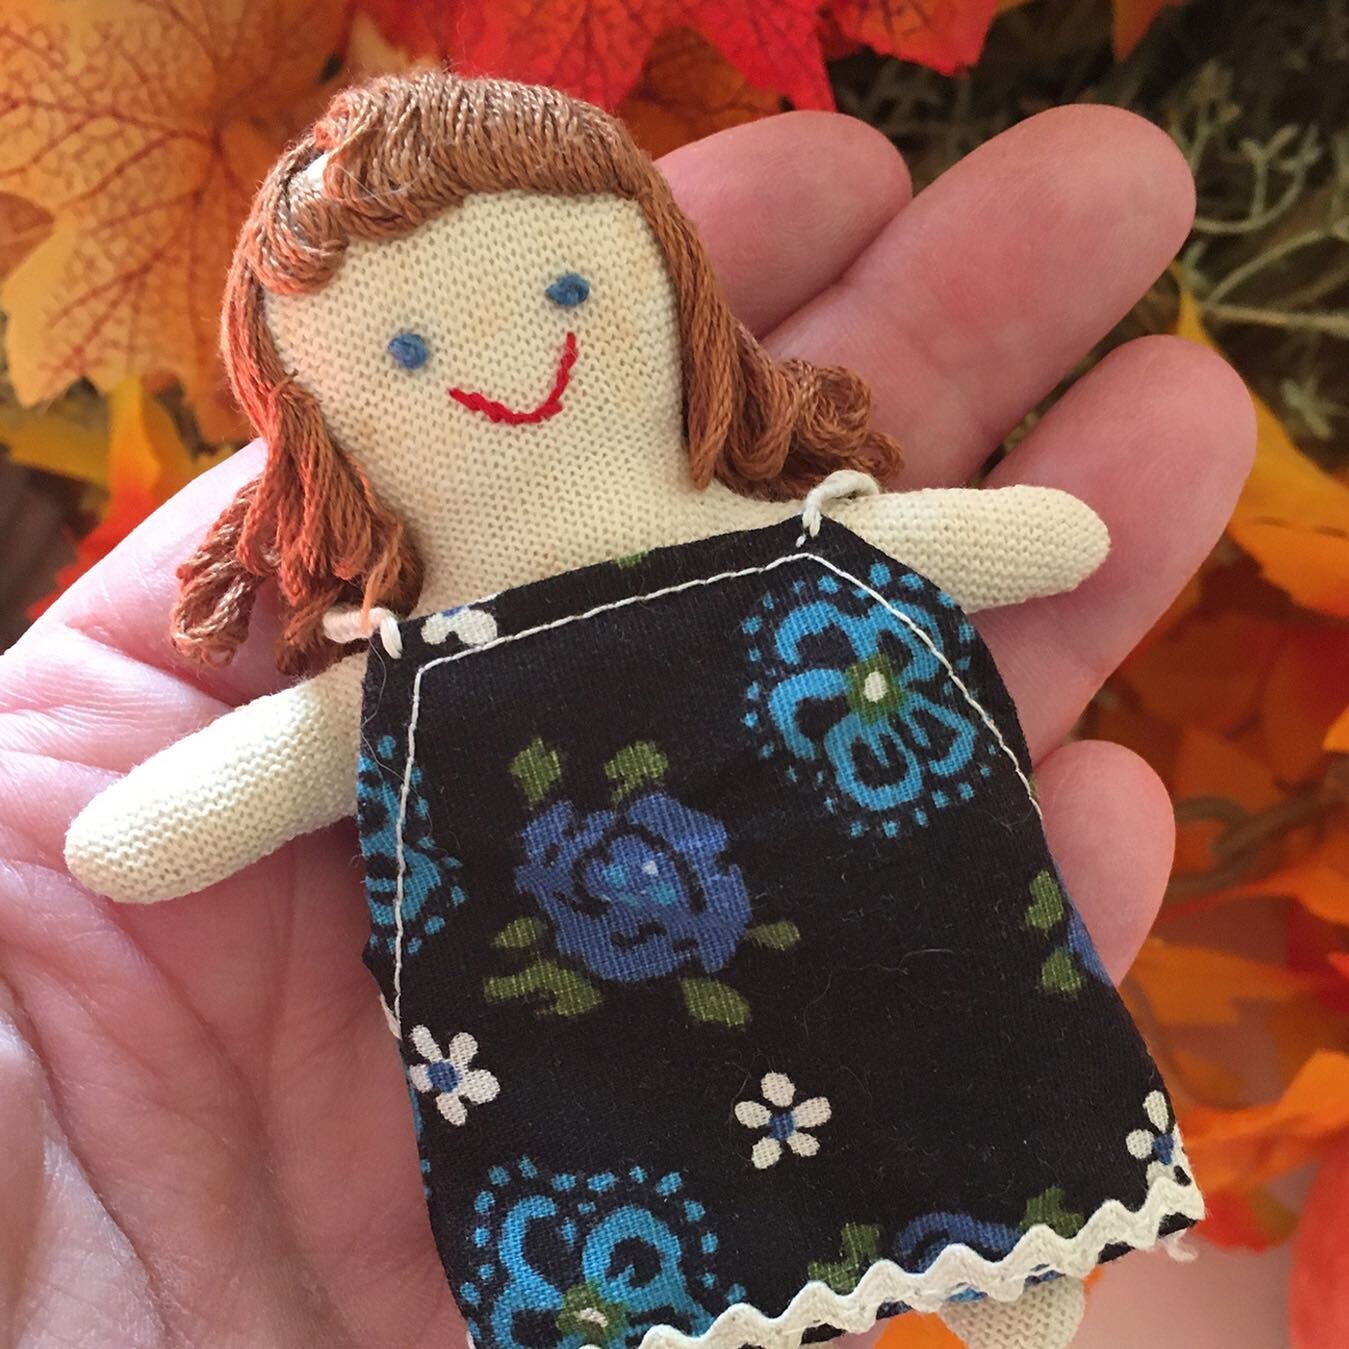 A lovely little lady I recently rediscovered, stashed away with some other childhood treasures. 

Mom made these for us, my older sister and I, when we were kids, using our old cotton anklets and fabric left over from the dresses she sewed for us. 

